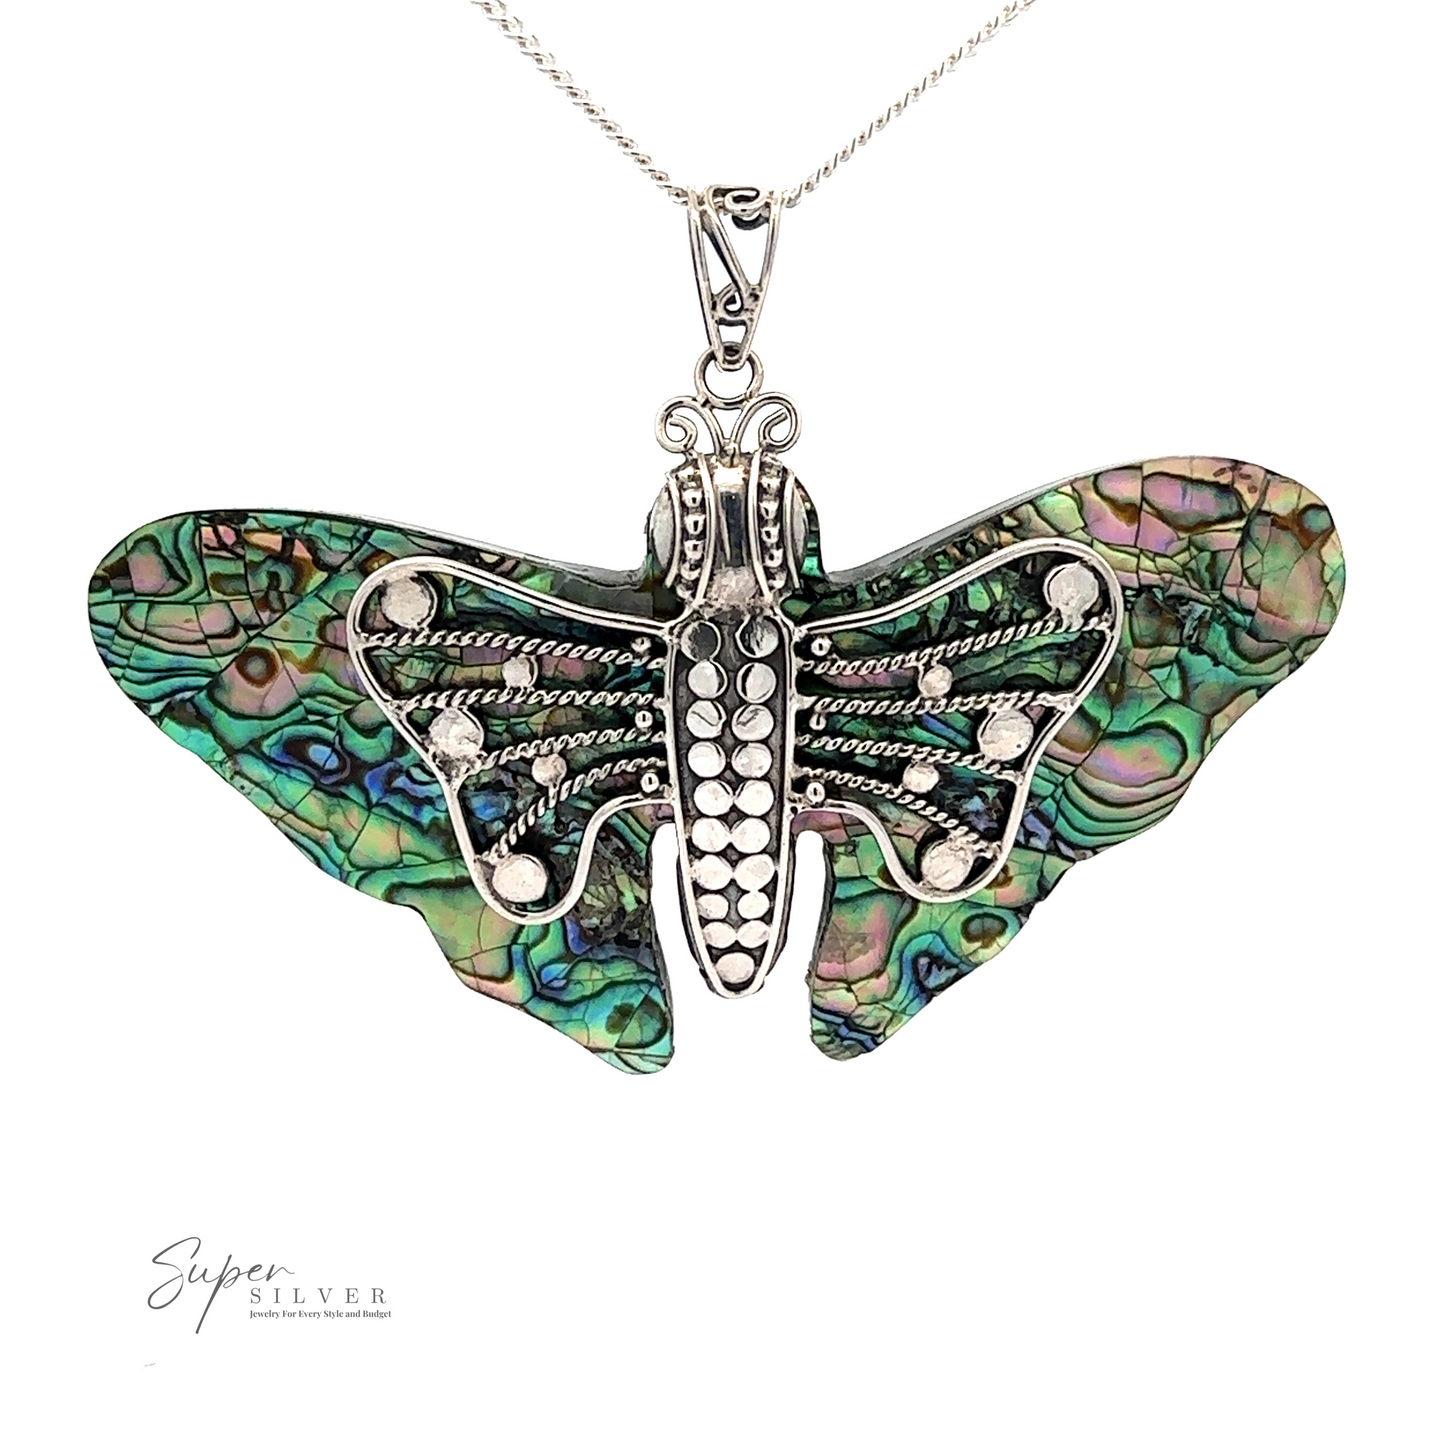 
                  
                    A Large Abalone Butterfly Pendant with intricate metallic detailing and vibrant, iridescent green and purple wings. The sterling silver chain is also visible. The brand name "Super Silver" is printed in the bottom left corner.
                  
                